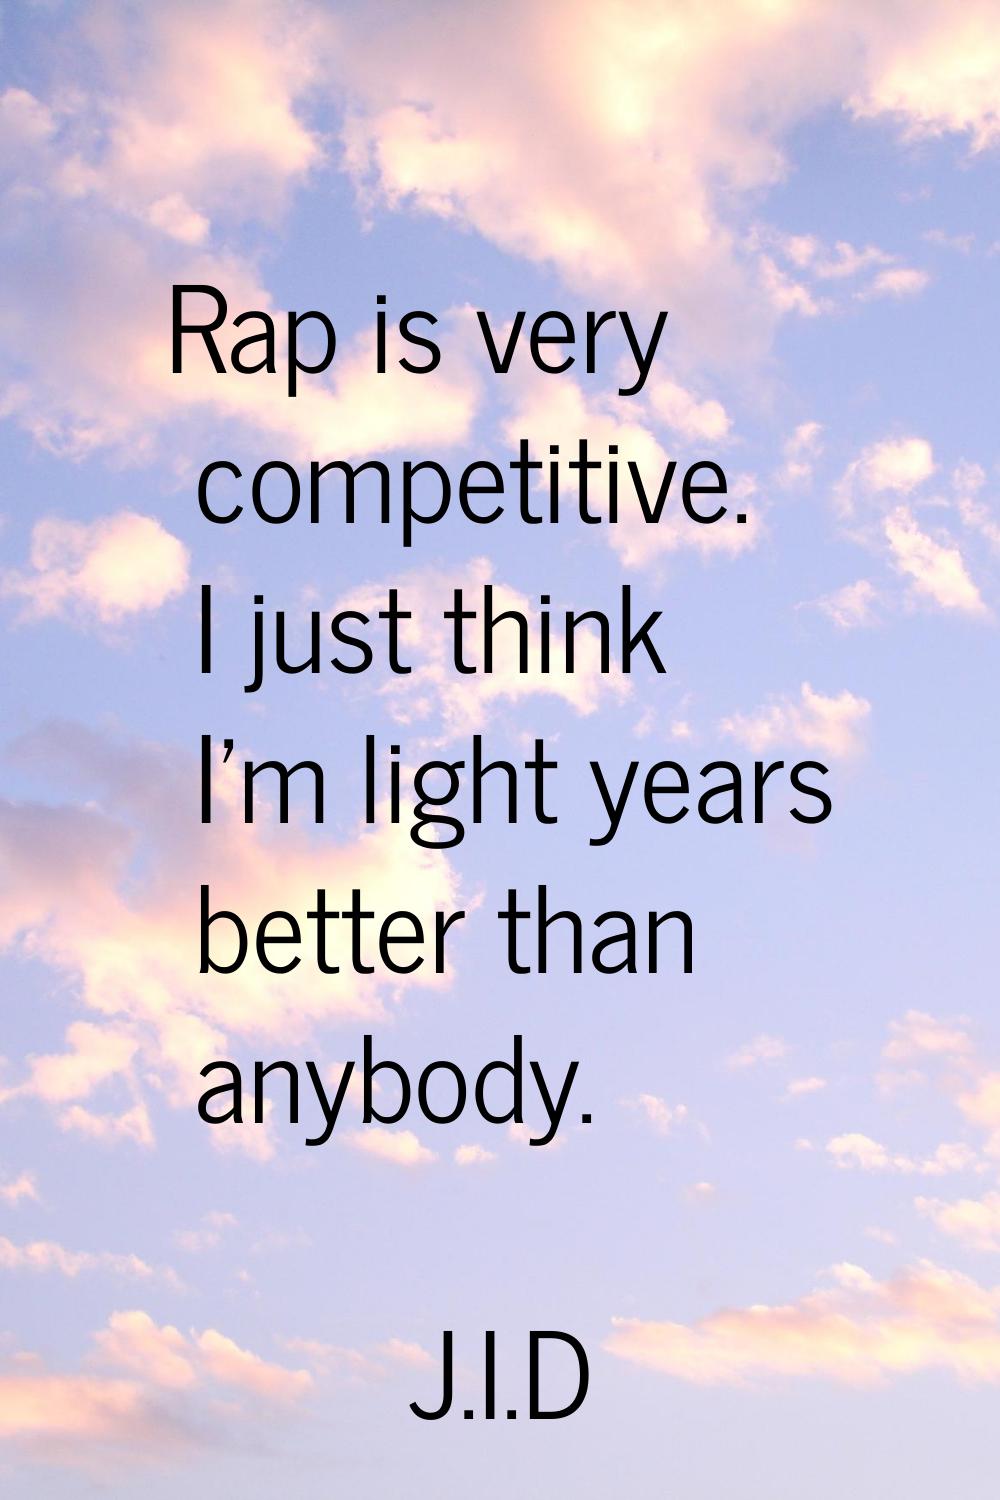 Rap is very competitive. I just think I'm light years better than anybody.